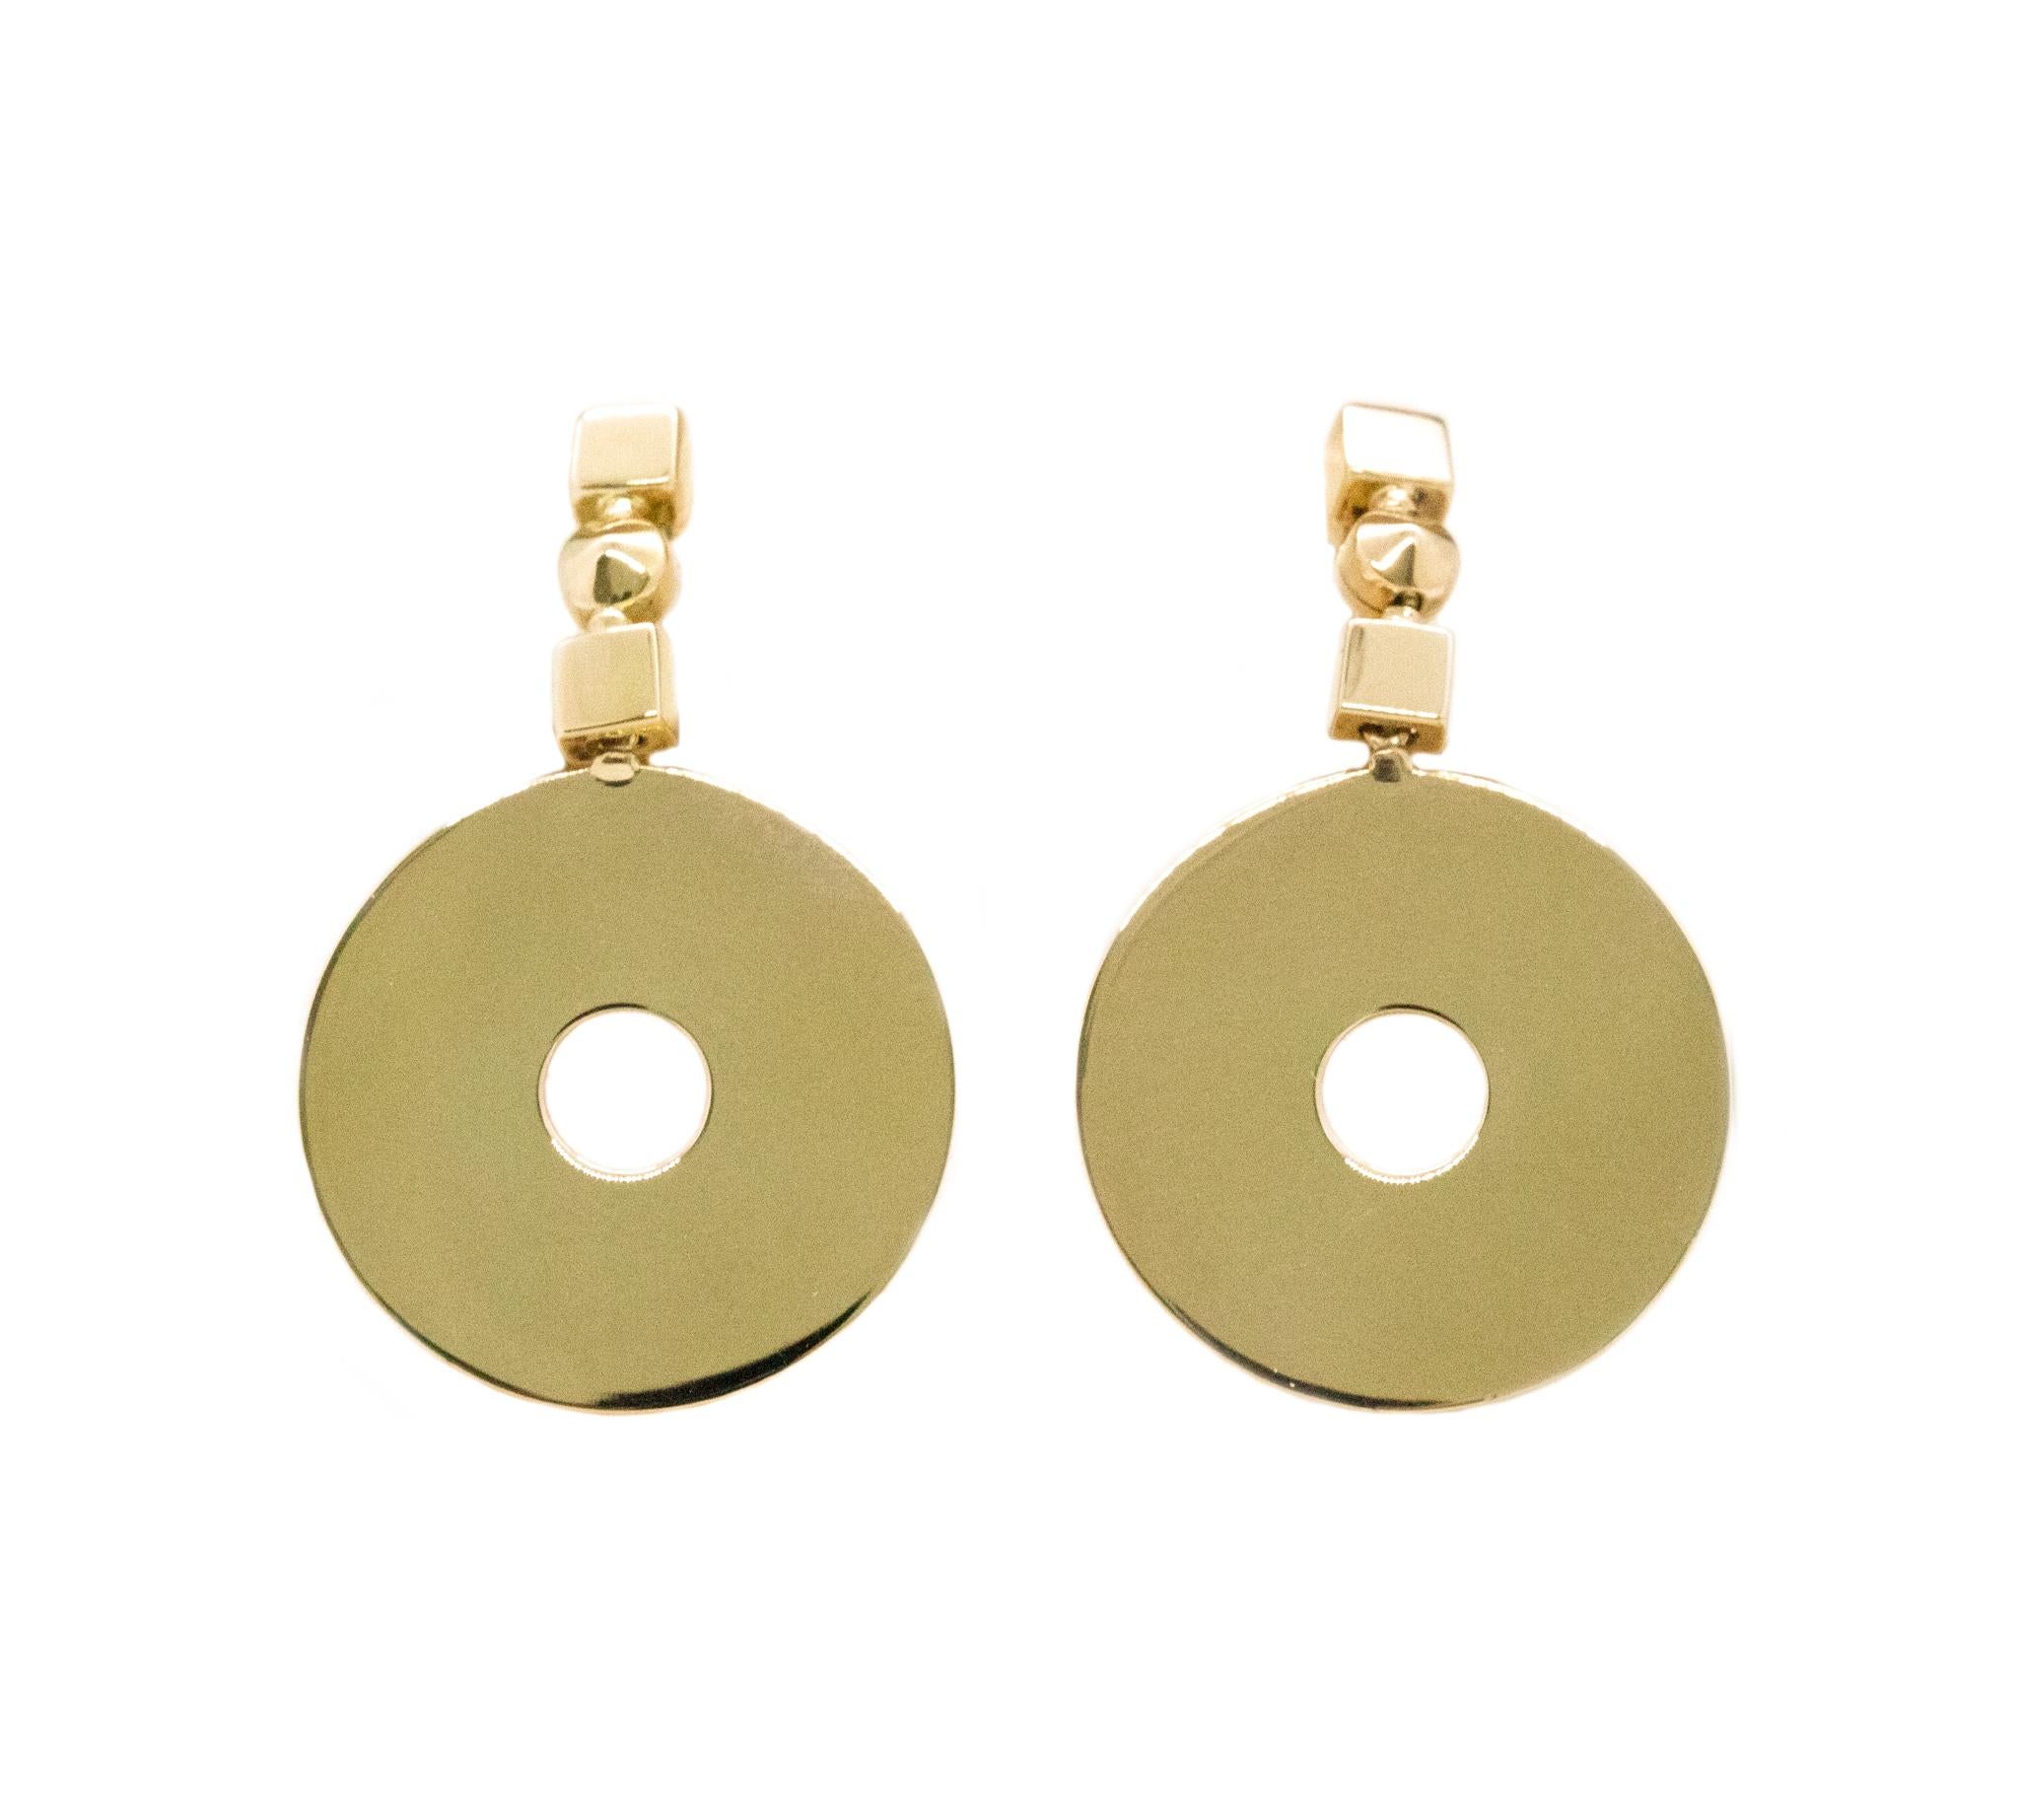 Lucea geometric drop earrings designed by Bvlgari.

A vintage geometric pair made in Italy by the house of Bvlgari, circa 1970's. This Lucea earrings was crafted in solid 18 karats of very high polished yellow gold and suited with posts (Removable)